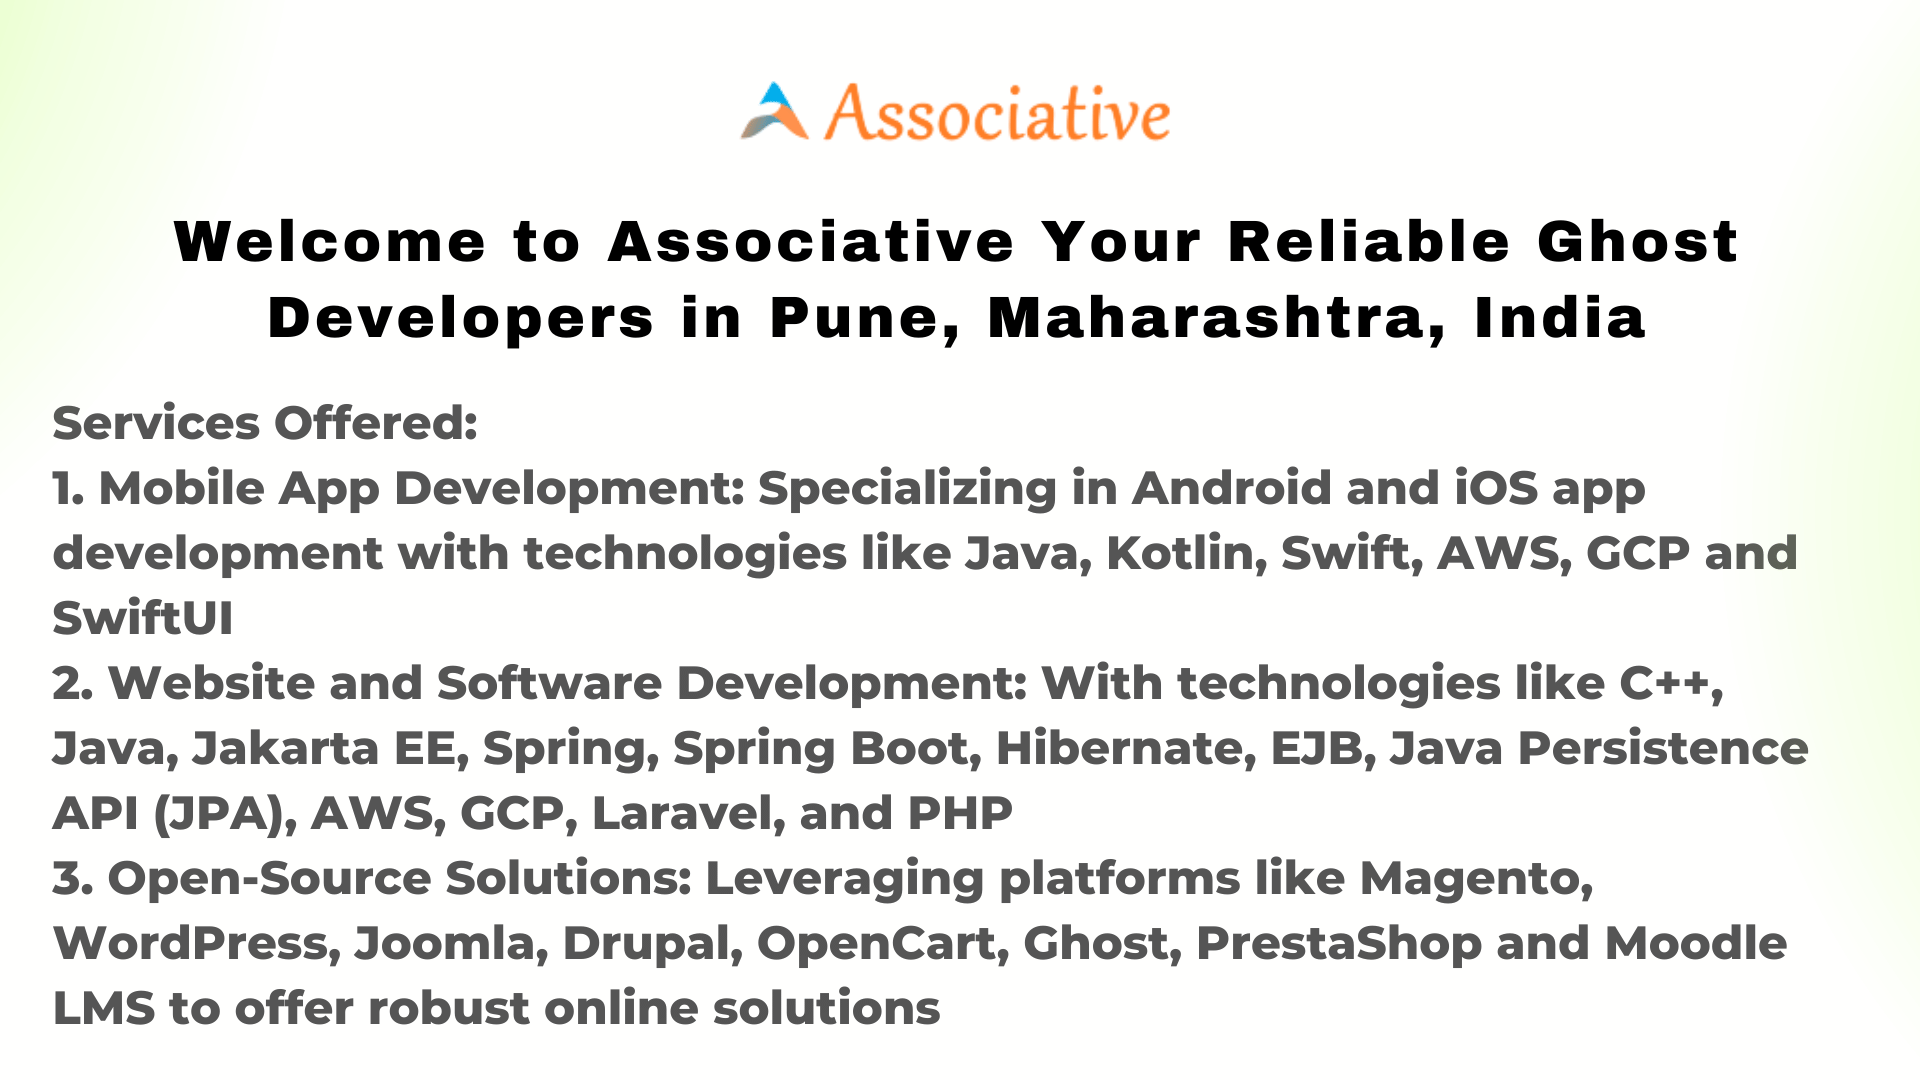 Welcome to Associative Your Reliable Ghost Developers in Pune, Maharashtra, India